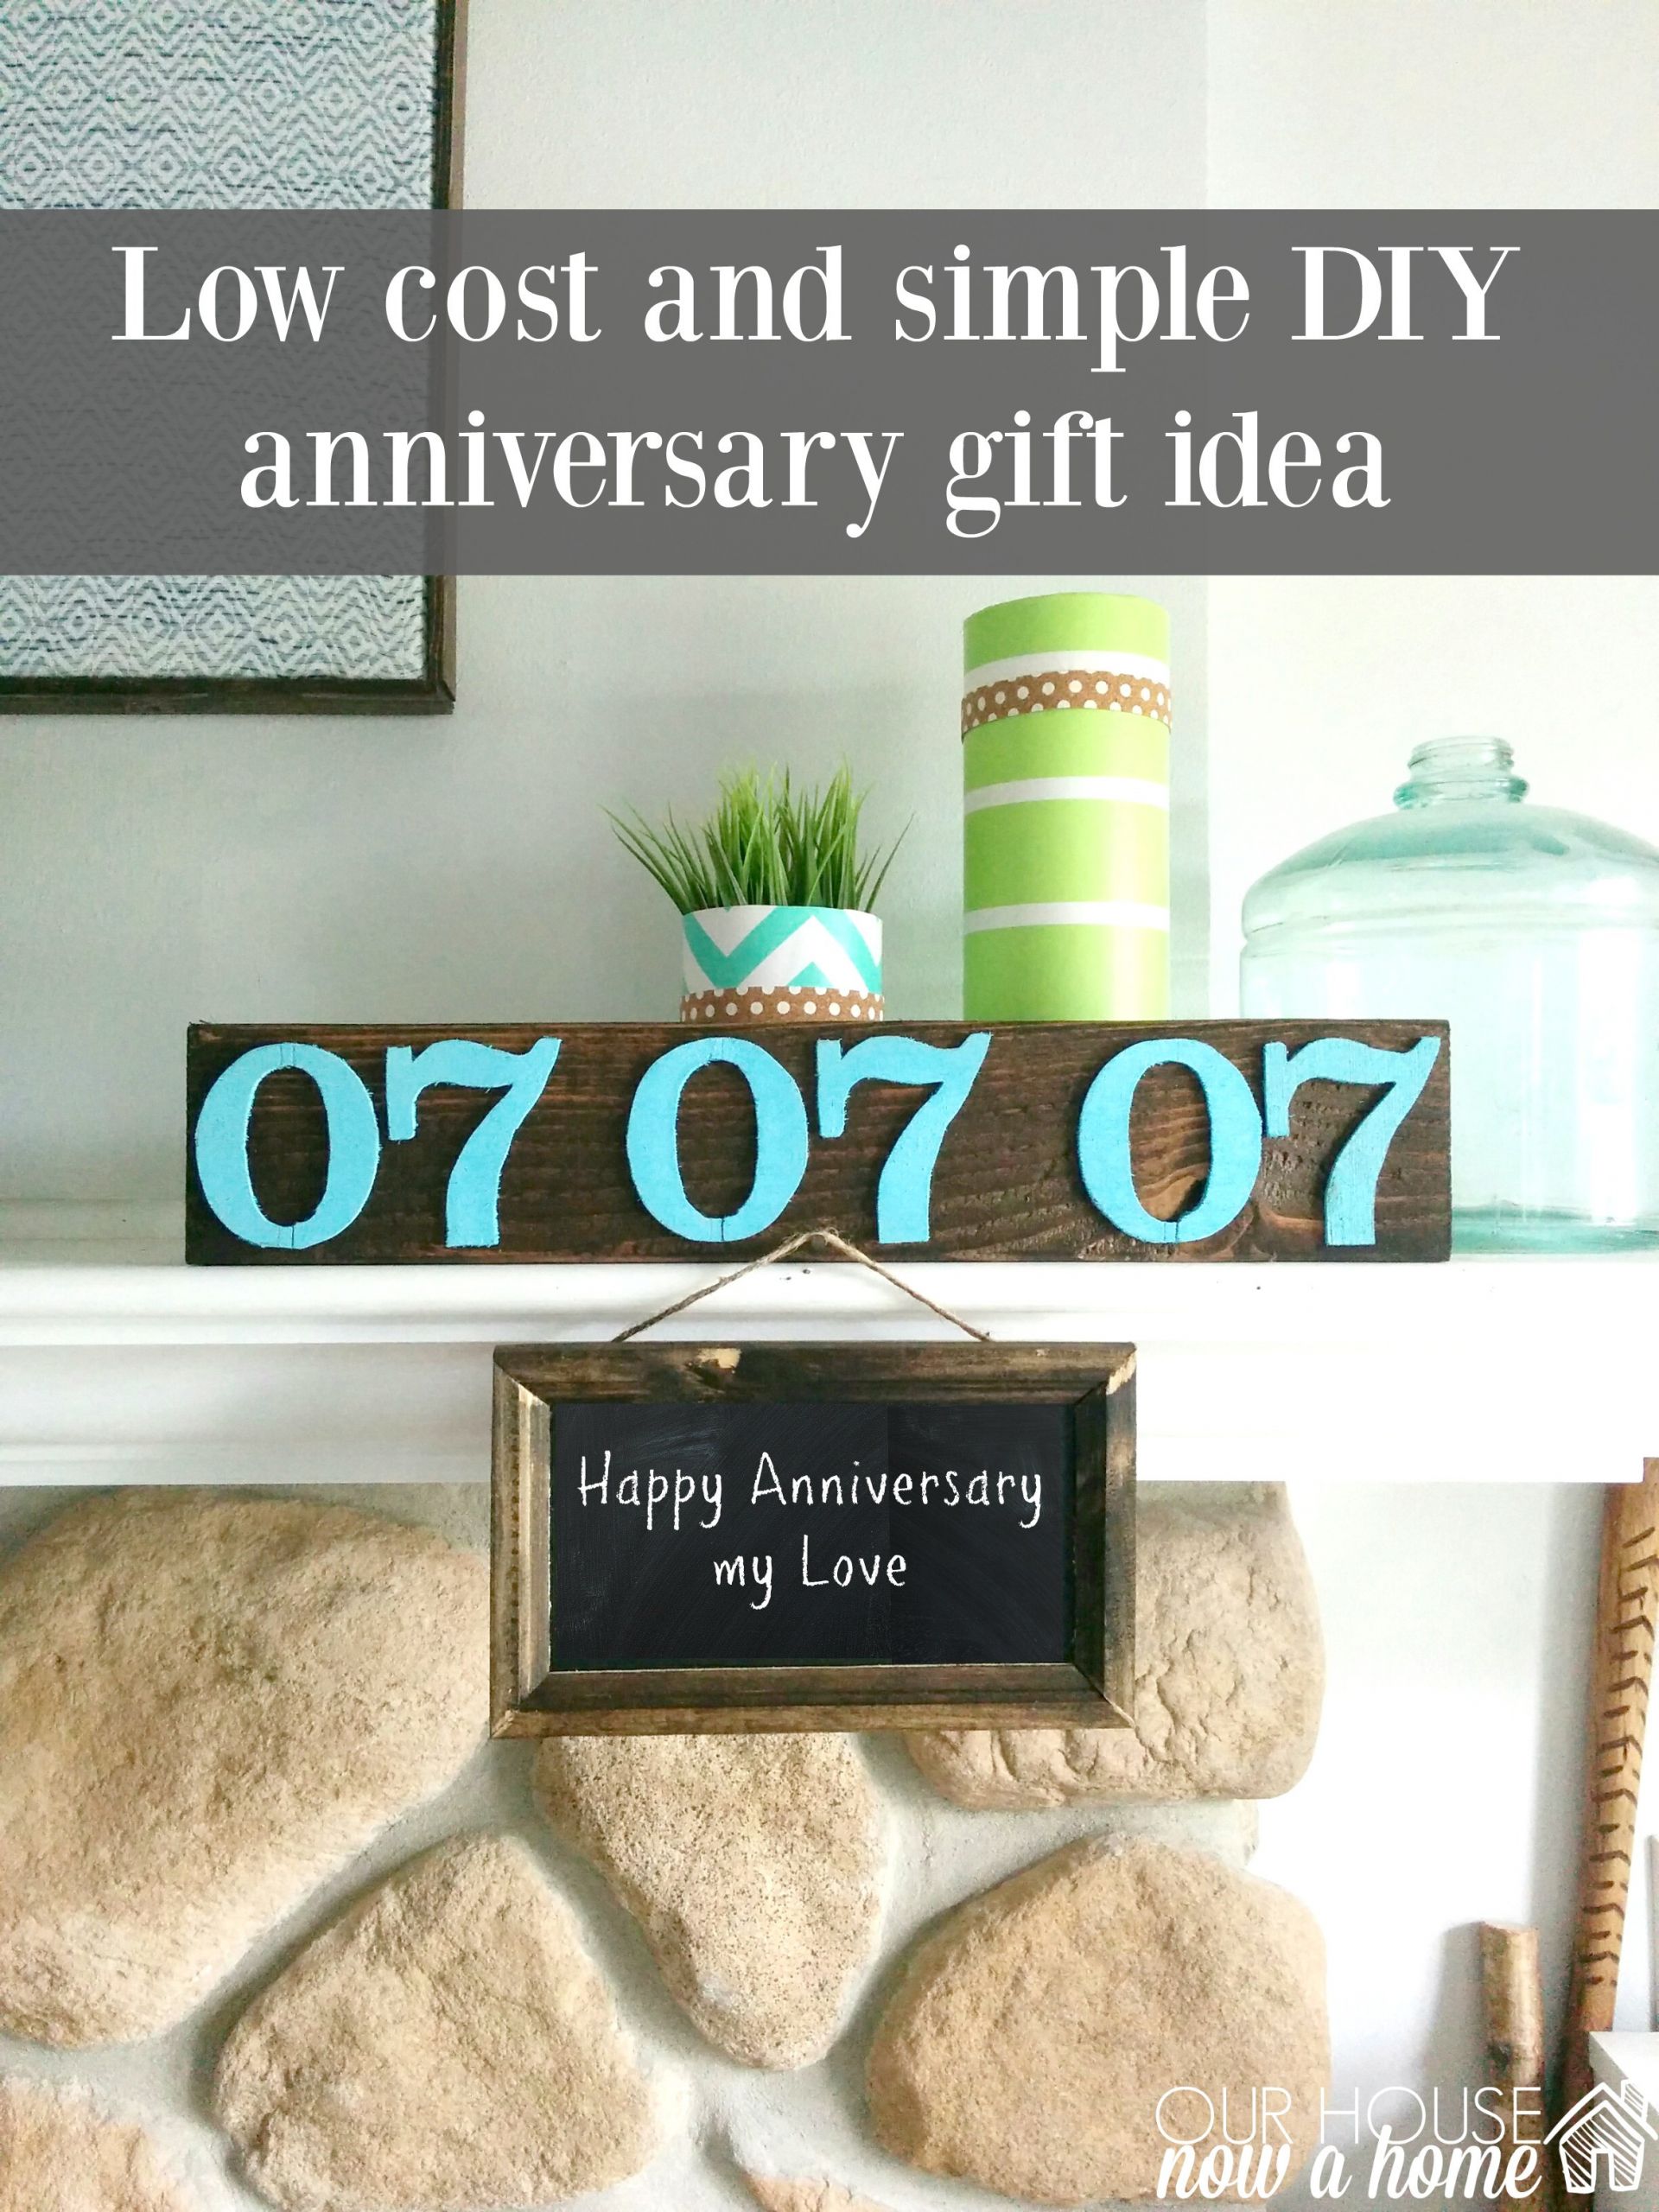 Anniversary Gift Ideas
 DIY and low cost anniversary t ideas • Our House Now a Home